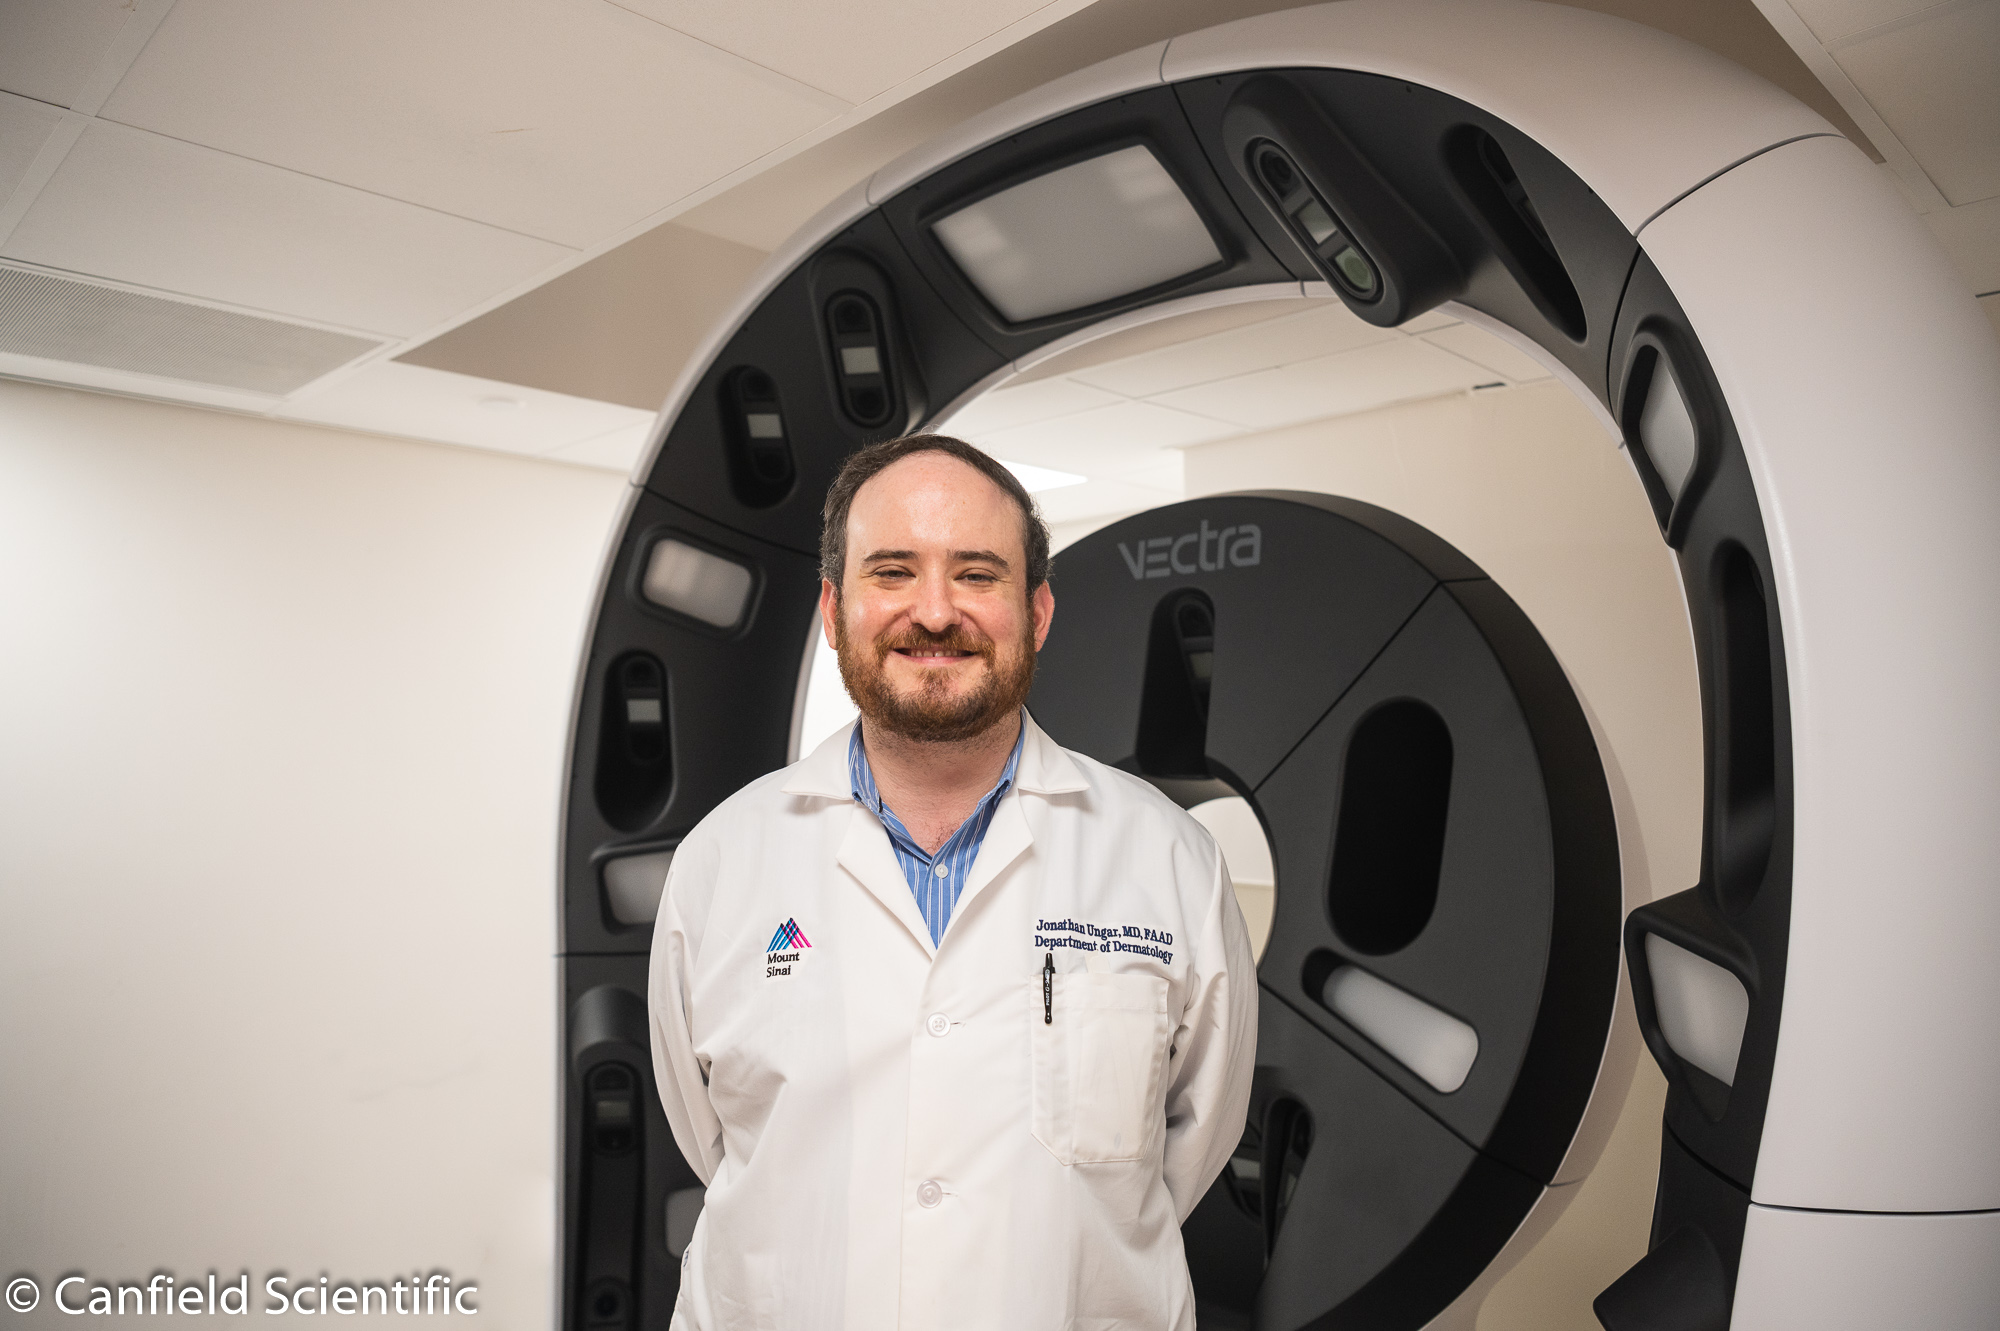 VECTRA® WB180 provides 3D whole-body imaging at Mount Sinai’s new Melanoma and Skin Cancer Center.